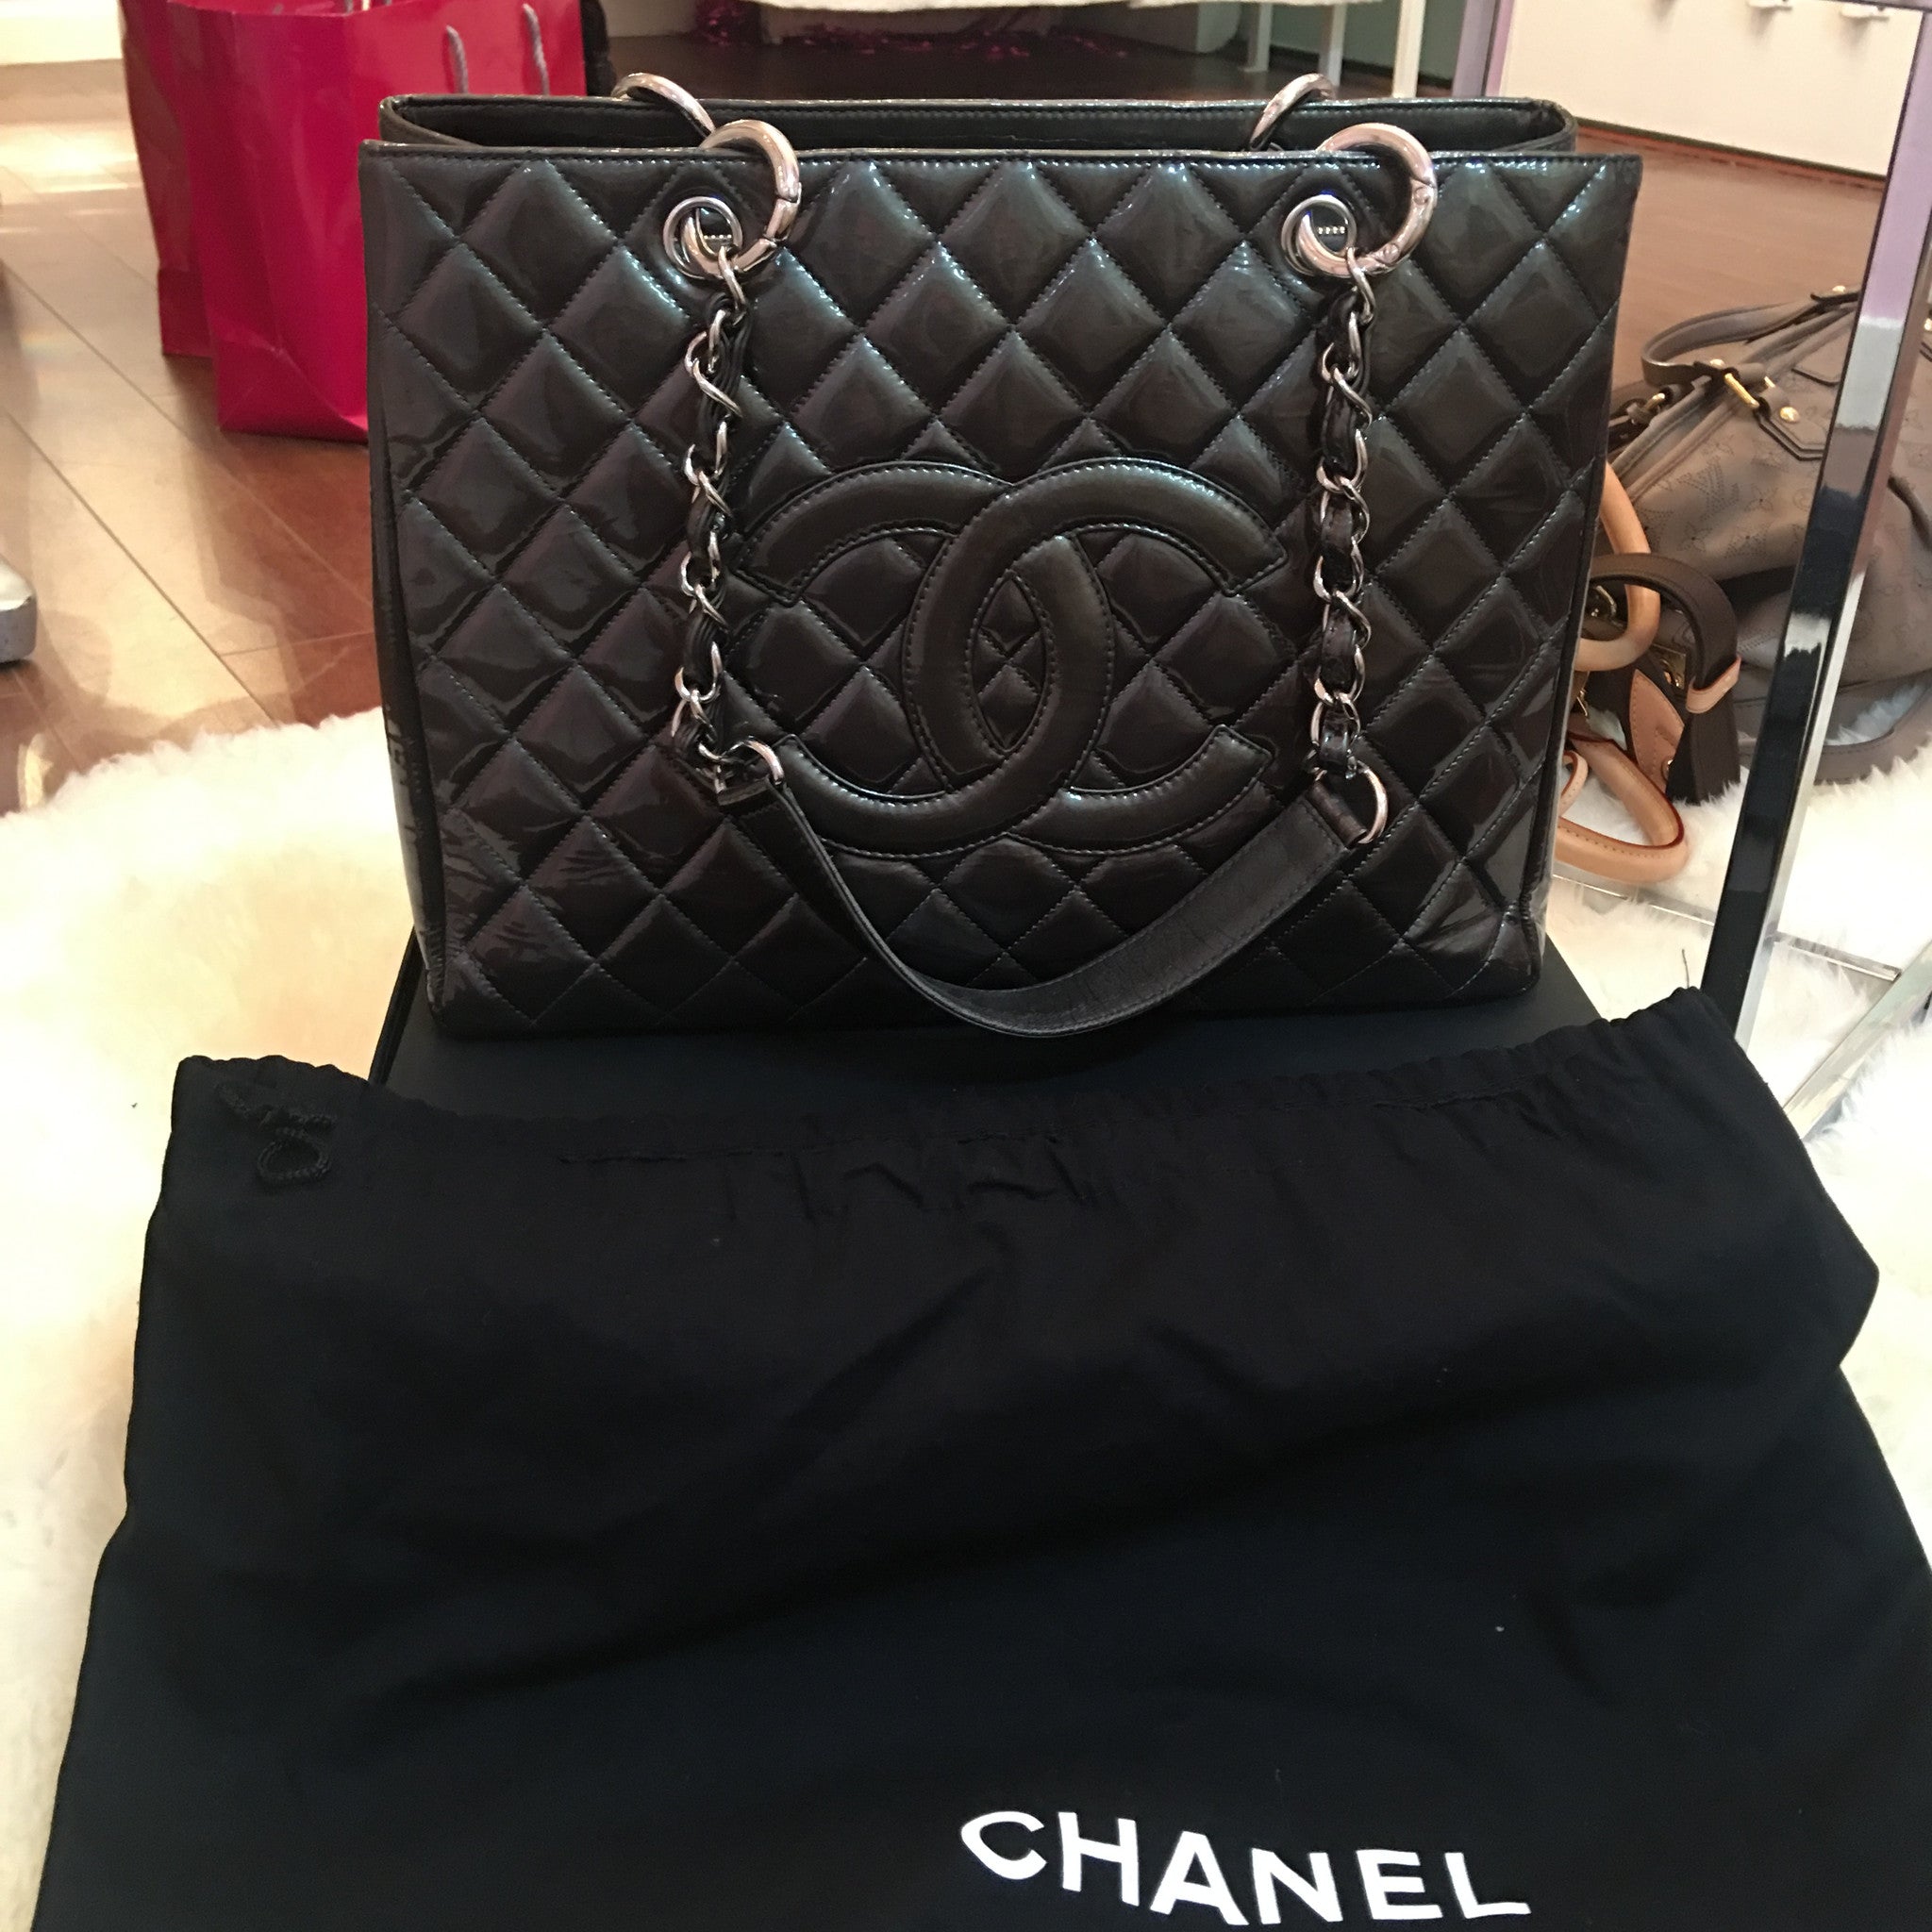 Chanel gst – Beccas Bags